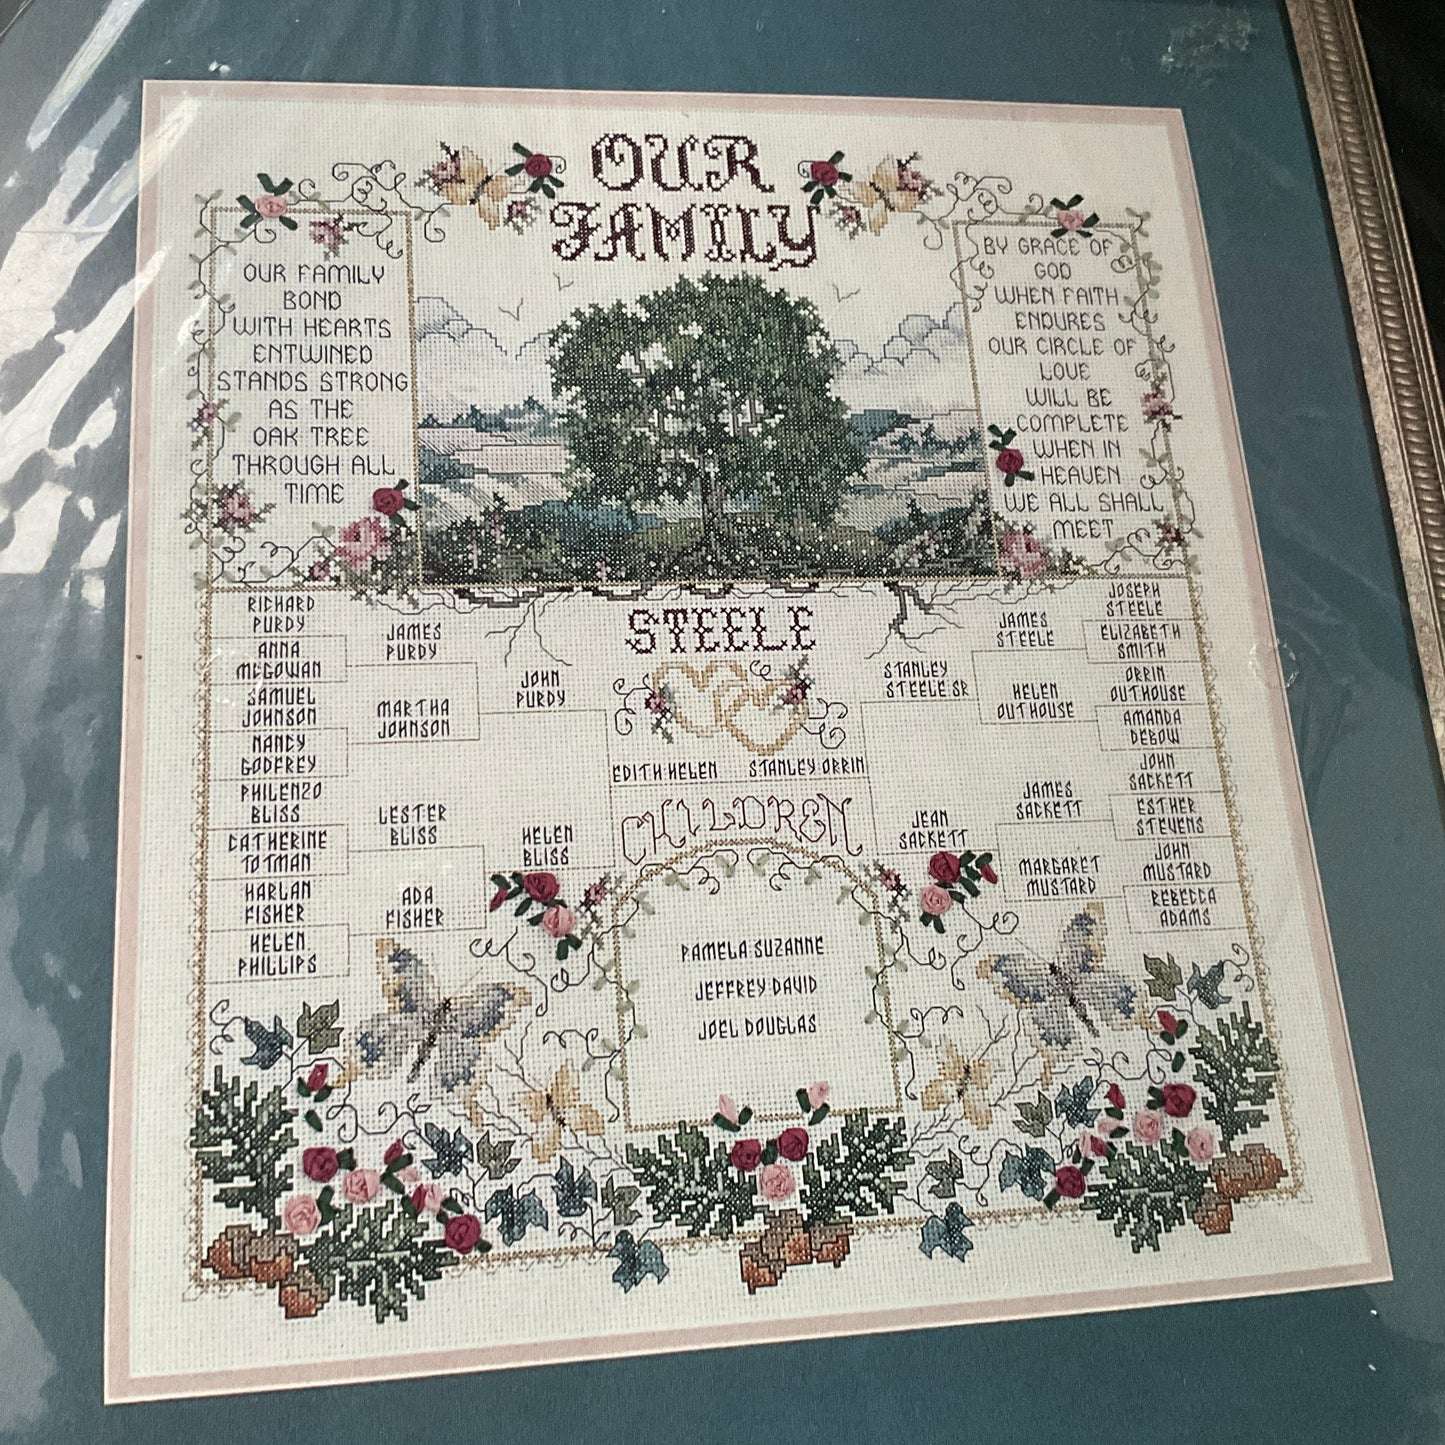 Bucilla Through the Years 41336 vintage 1996 counted cross stitch kit 14 count white AIDA 16 by 18 inches